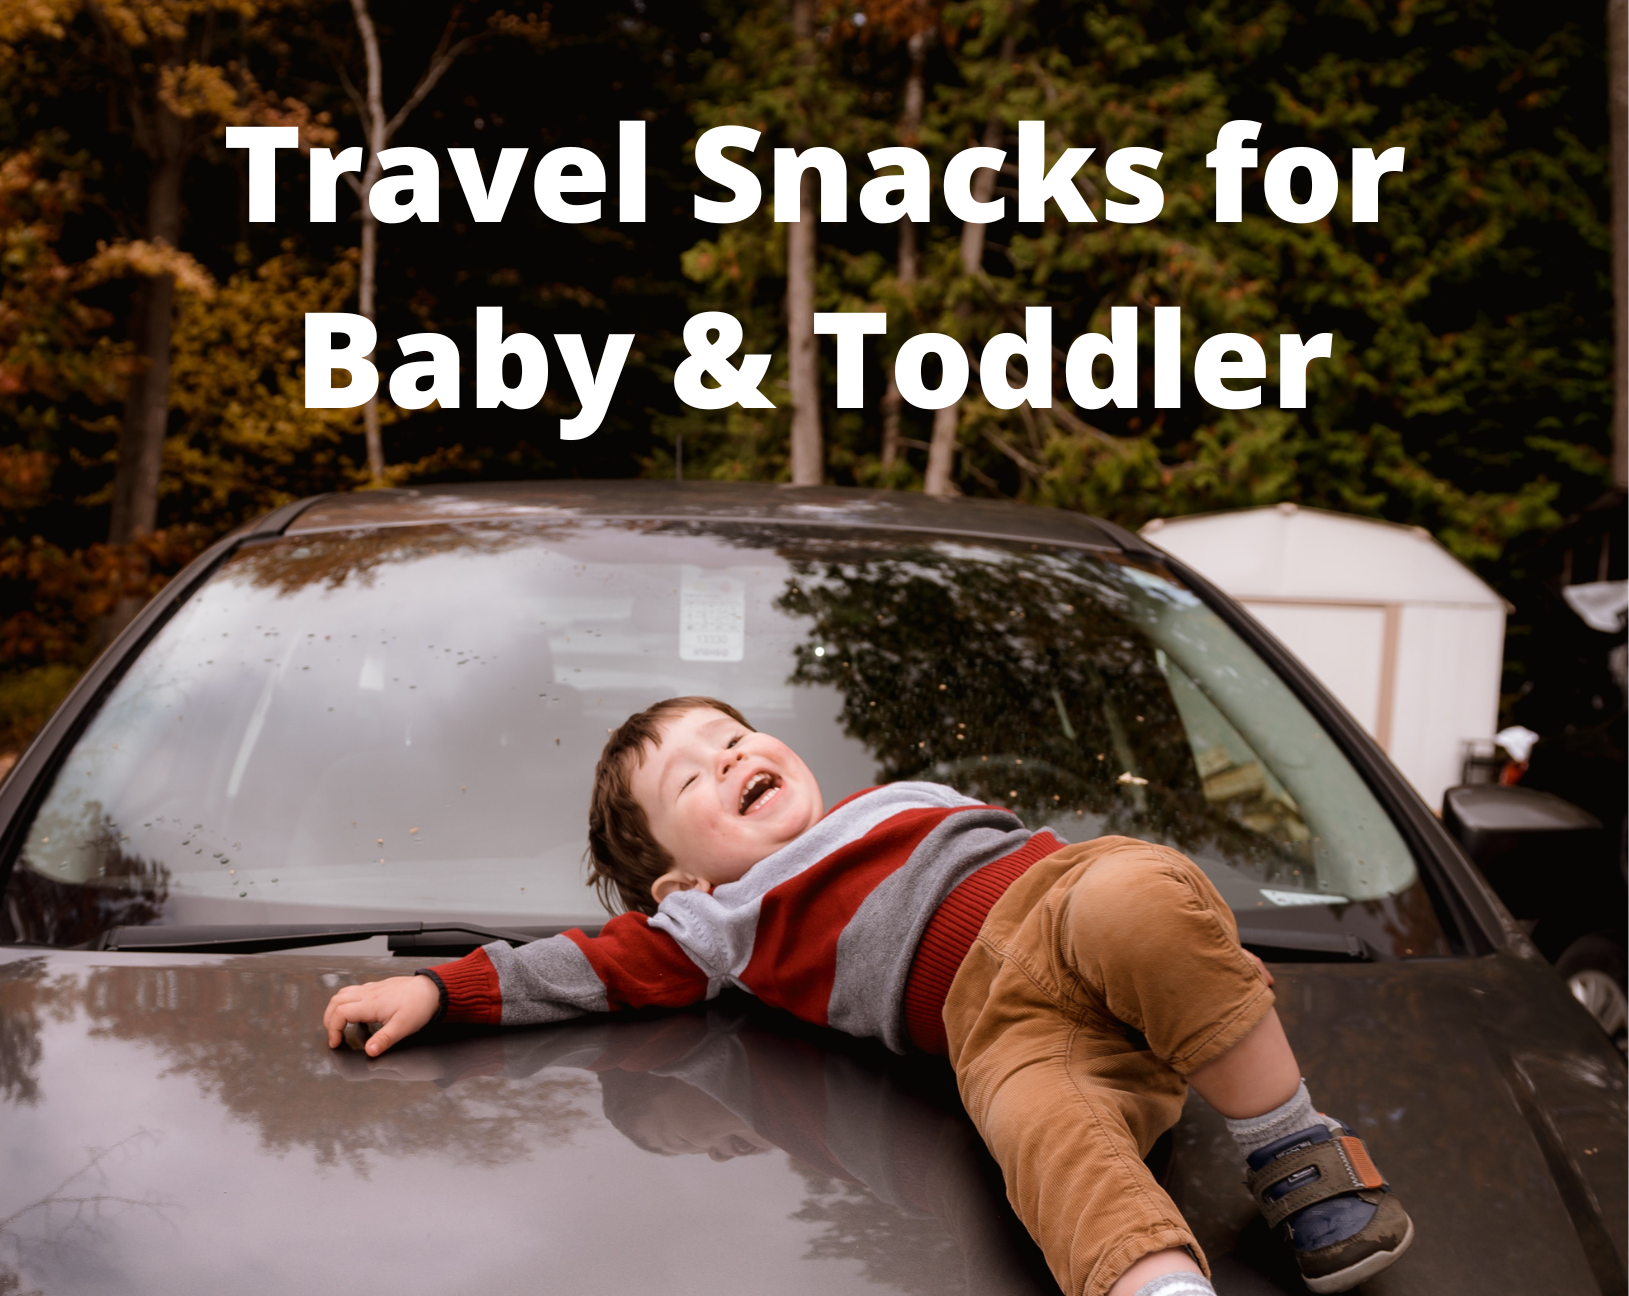 Top Travel Snacks for Baby or Toddler